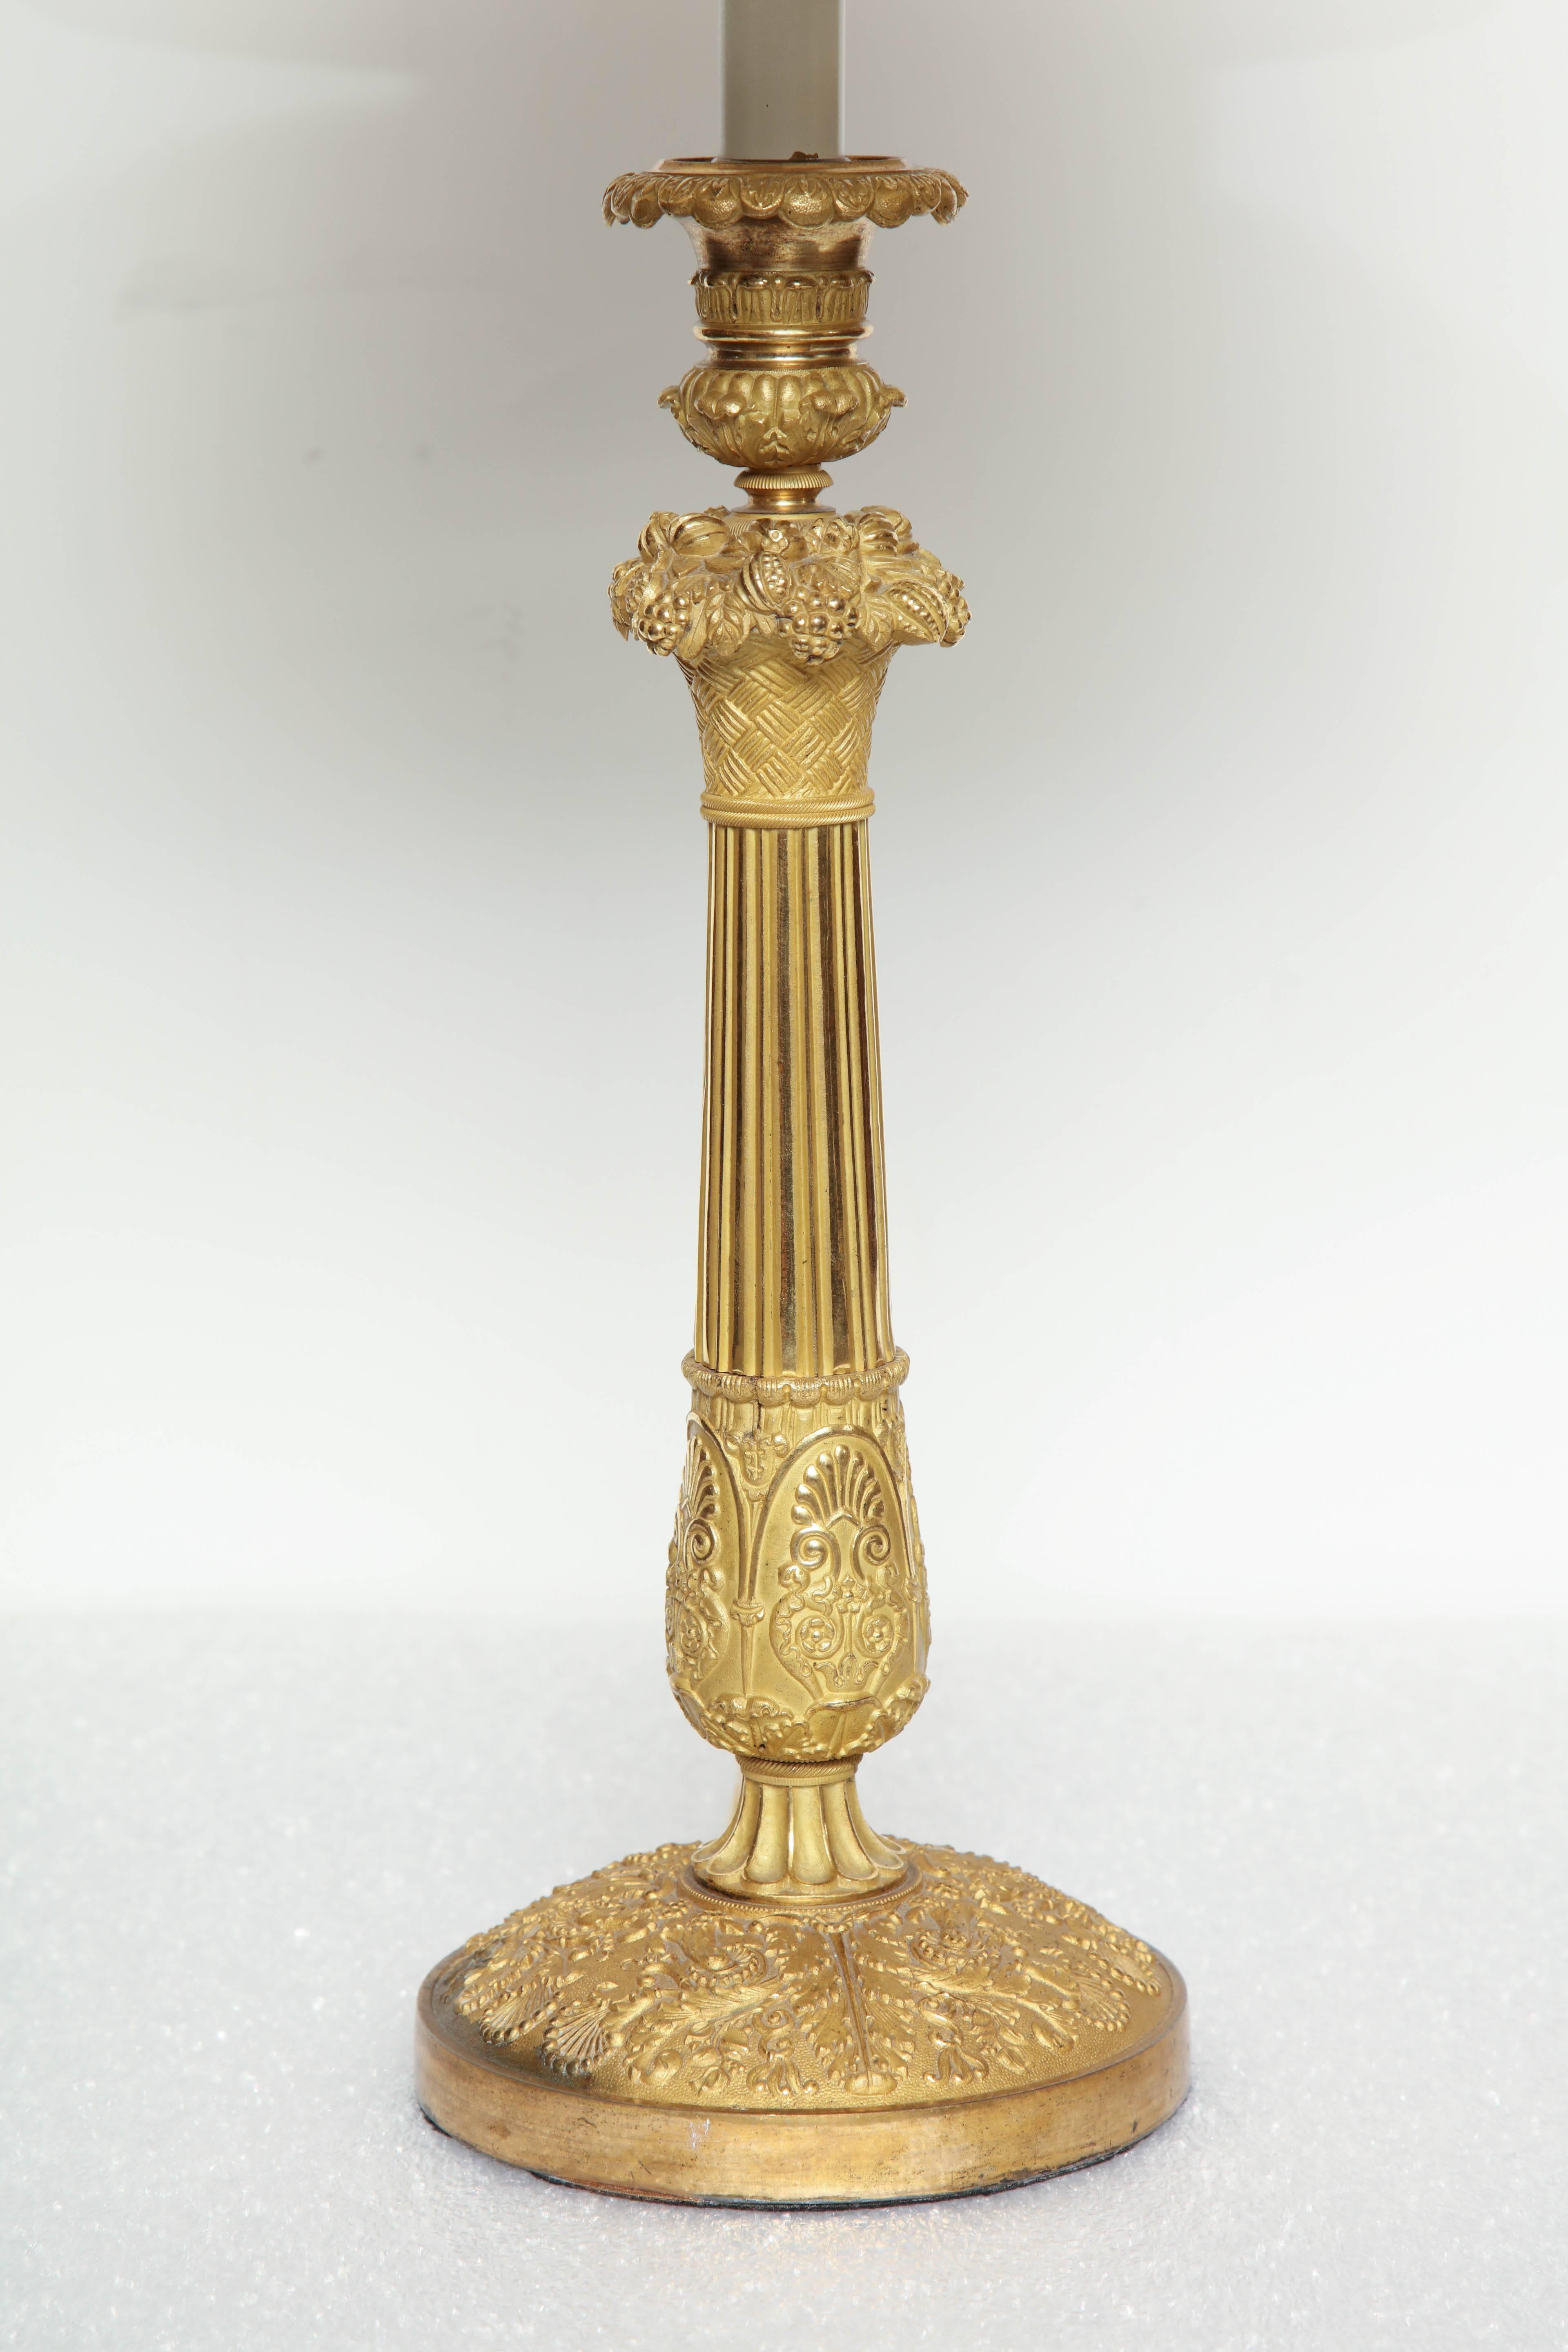 19th century French, ormolu candlestick converted to a lamp, Charles X.